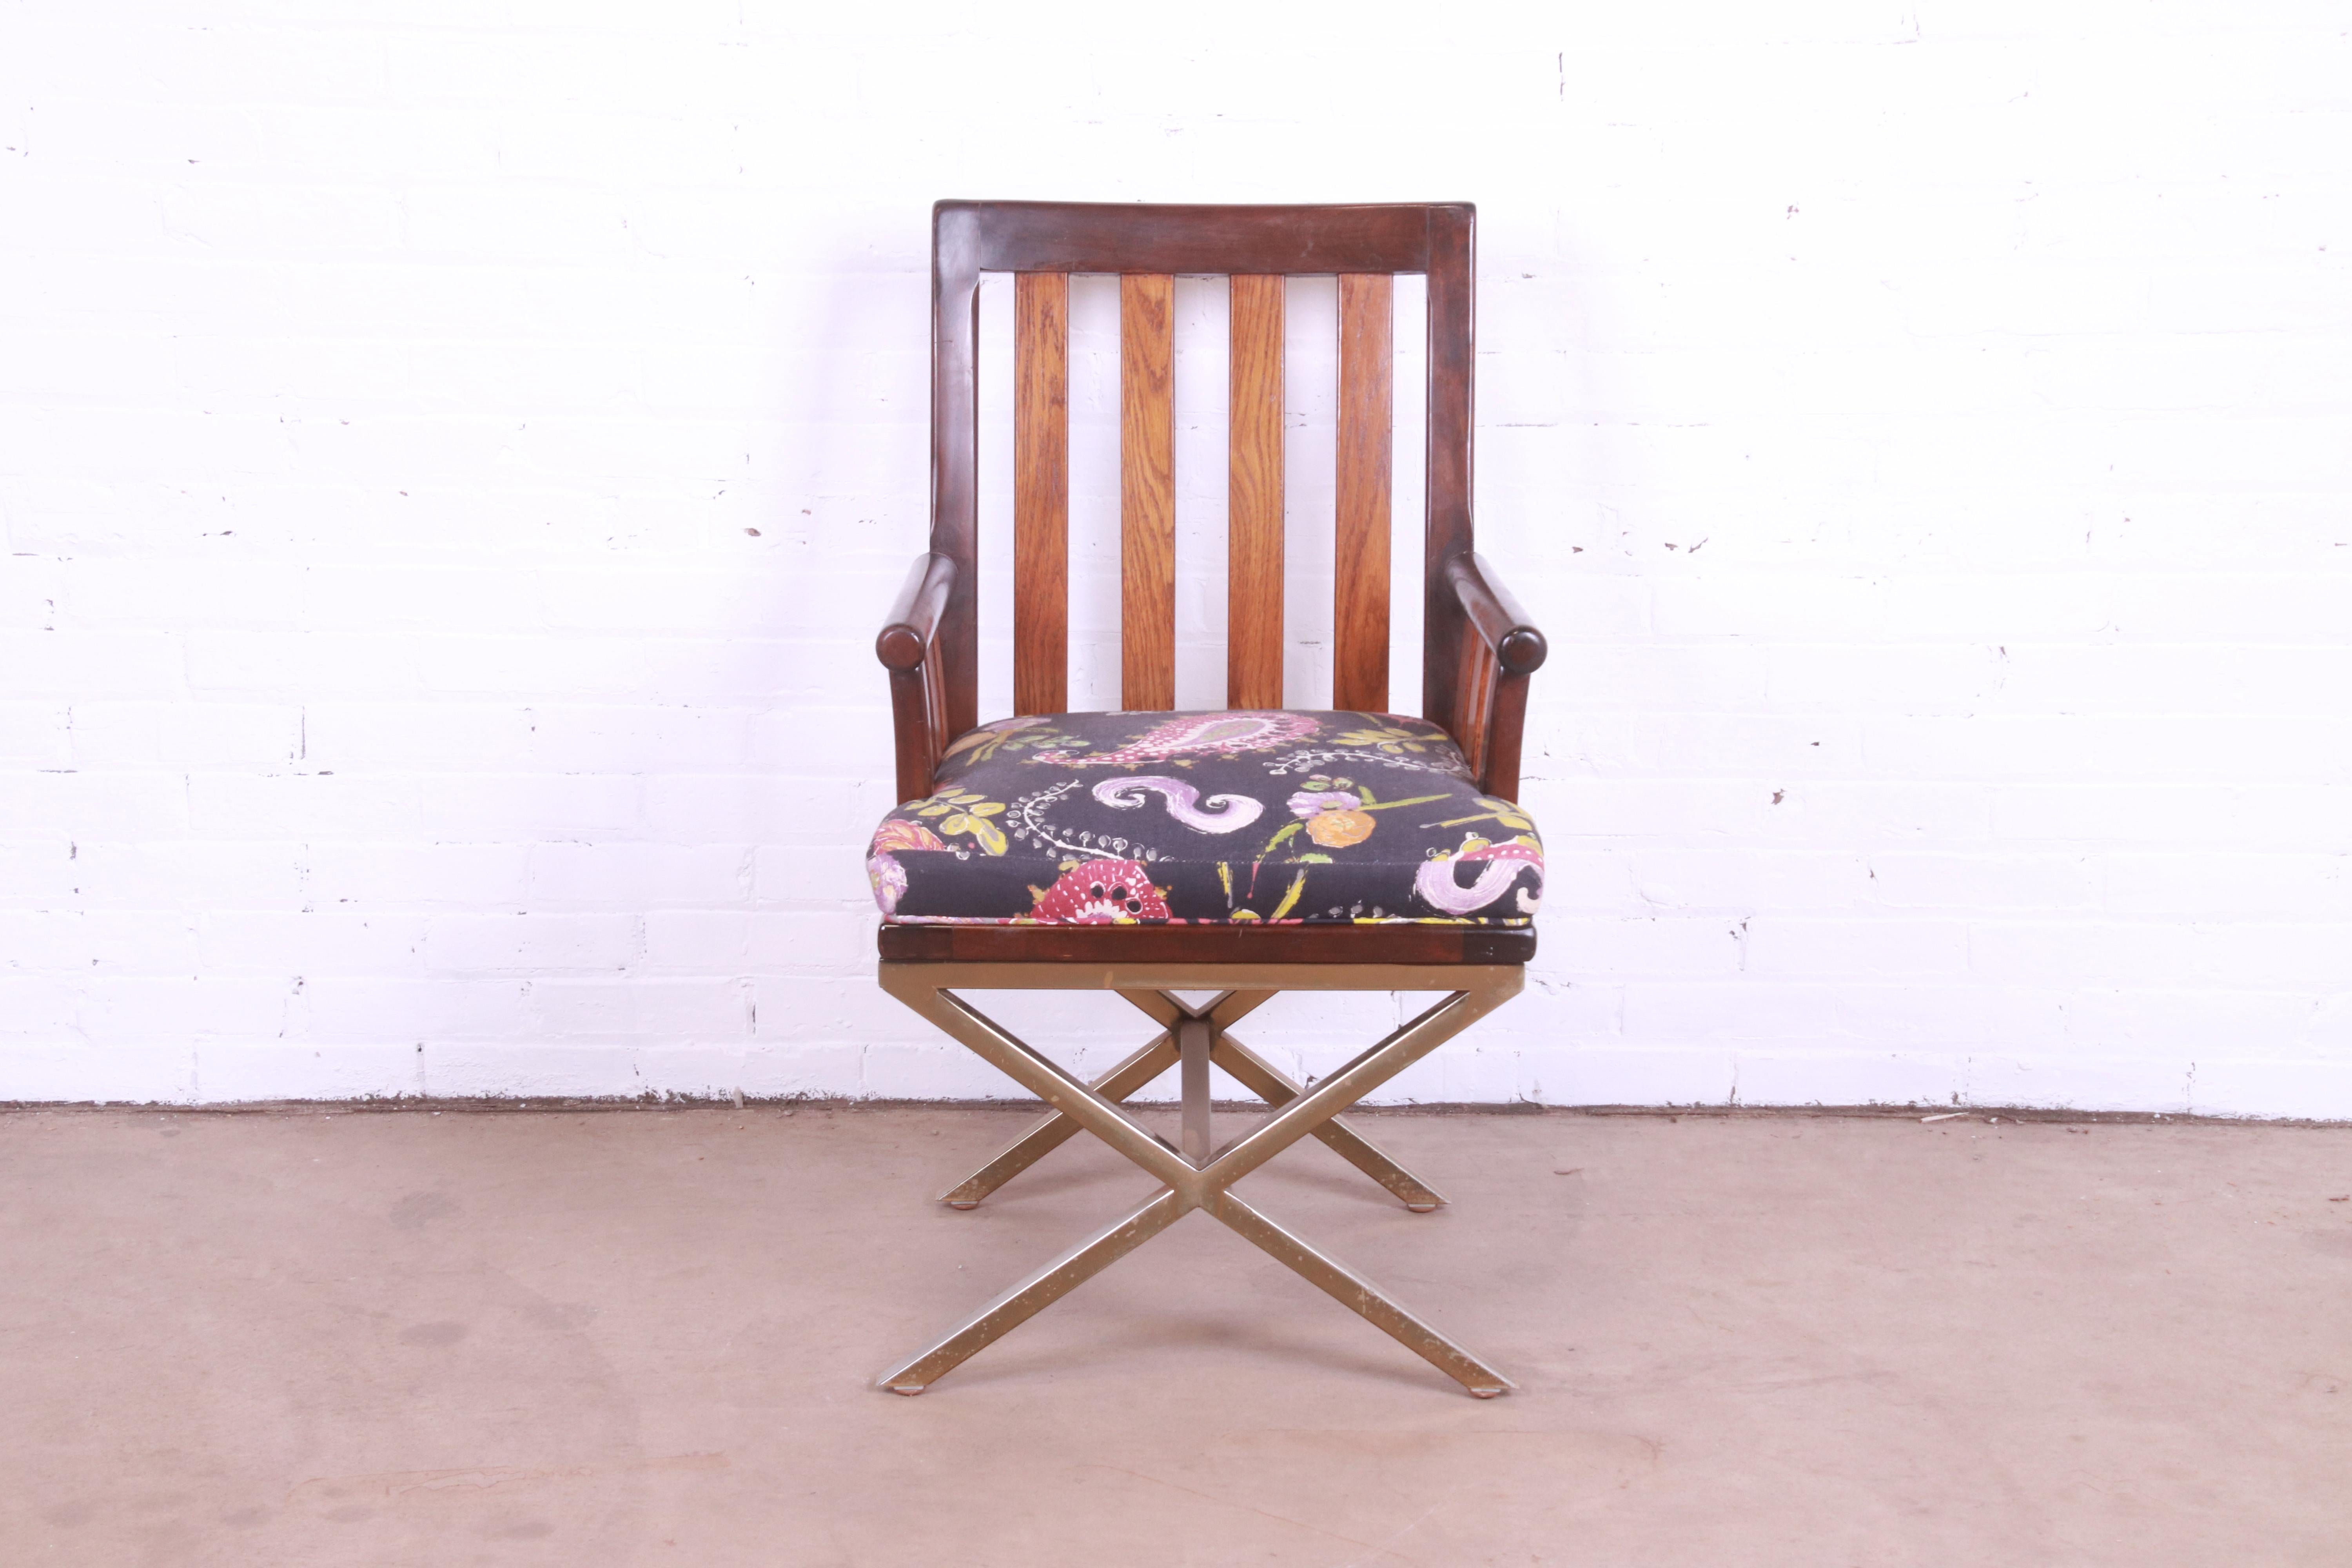 A beautiful Milo Baughman style club chair or director's chair

Circa 1970s

Solid rosewood frame, with teak slats, upholstered seat, and brass finished 